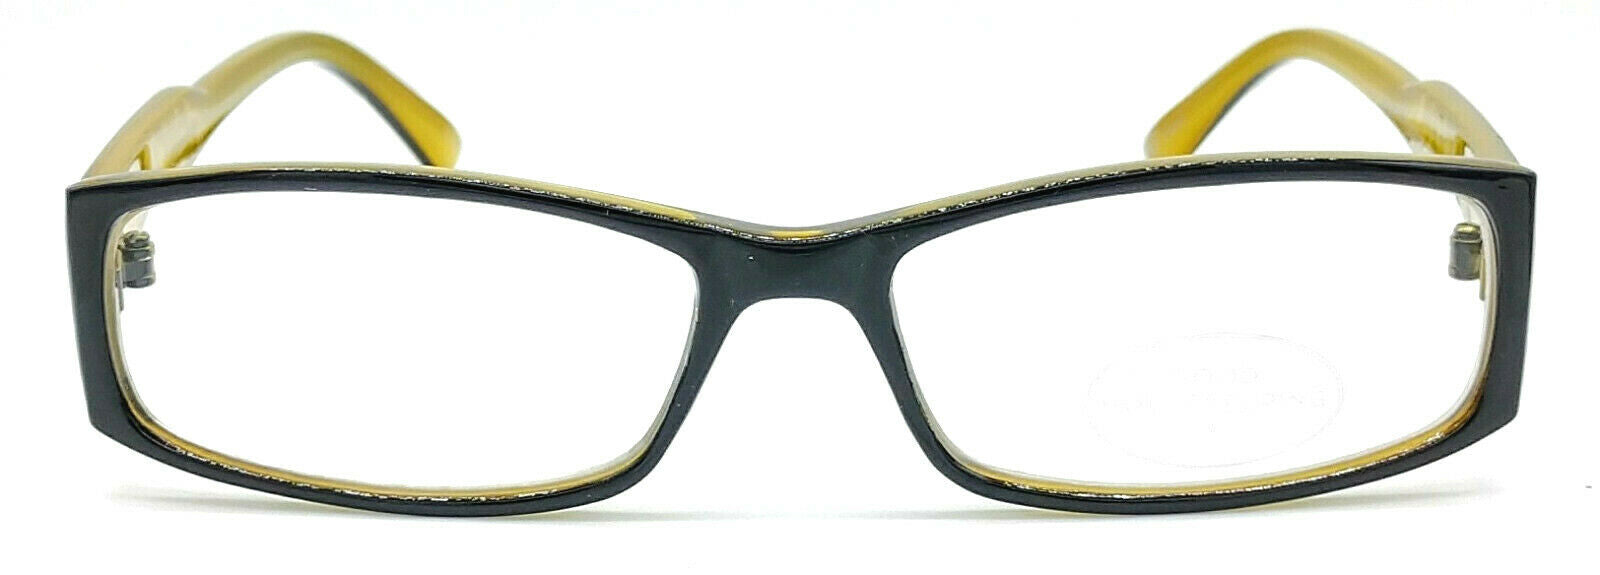 Personal Optics Rectangle Two-Tone Black & Green with Vine pattern New